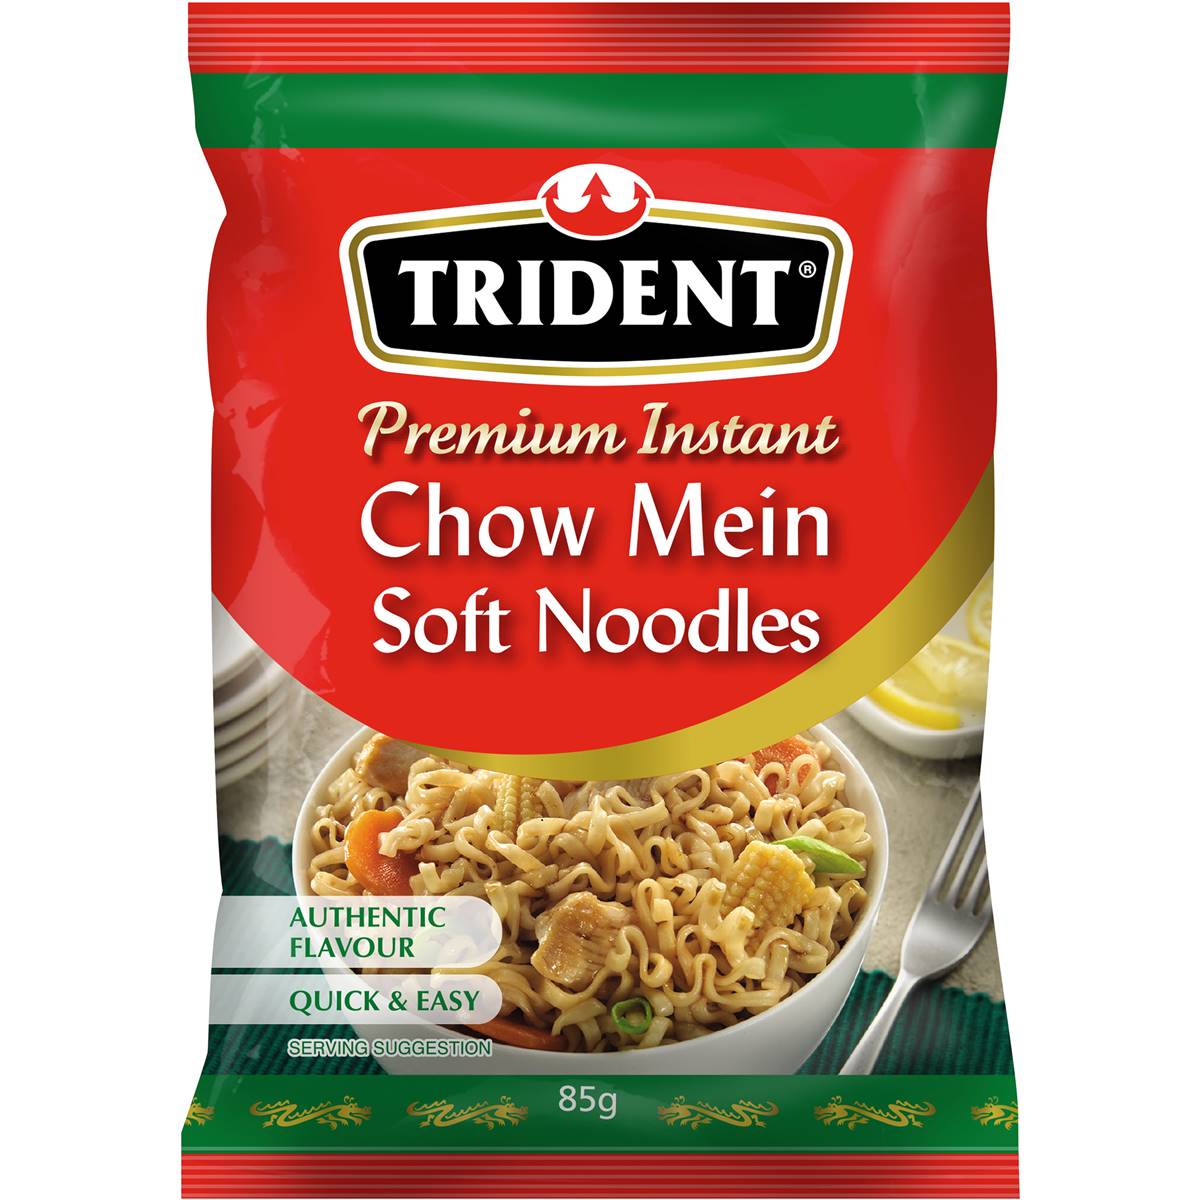 Trident Chow Mein Soft Noodles